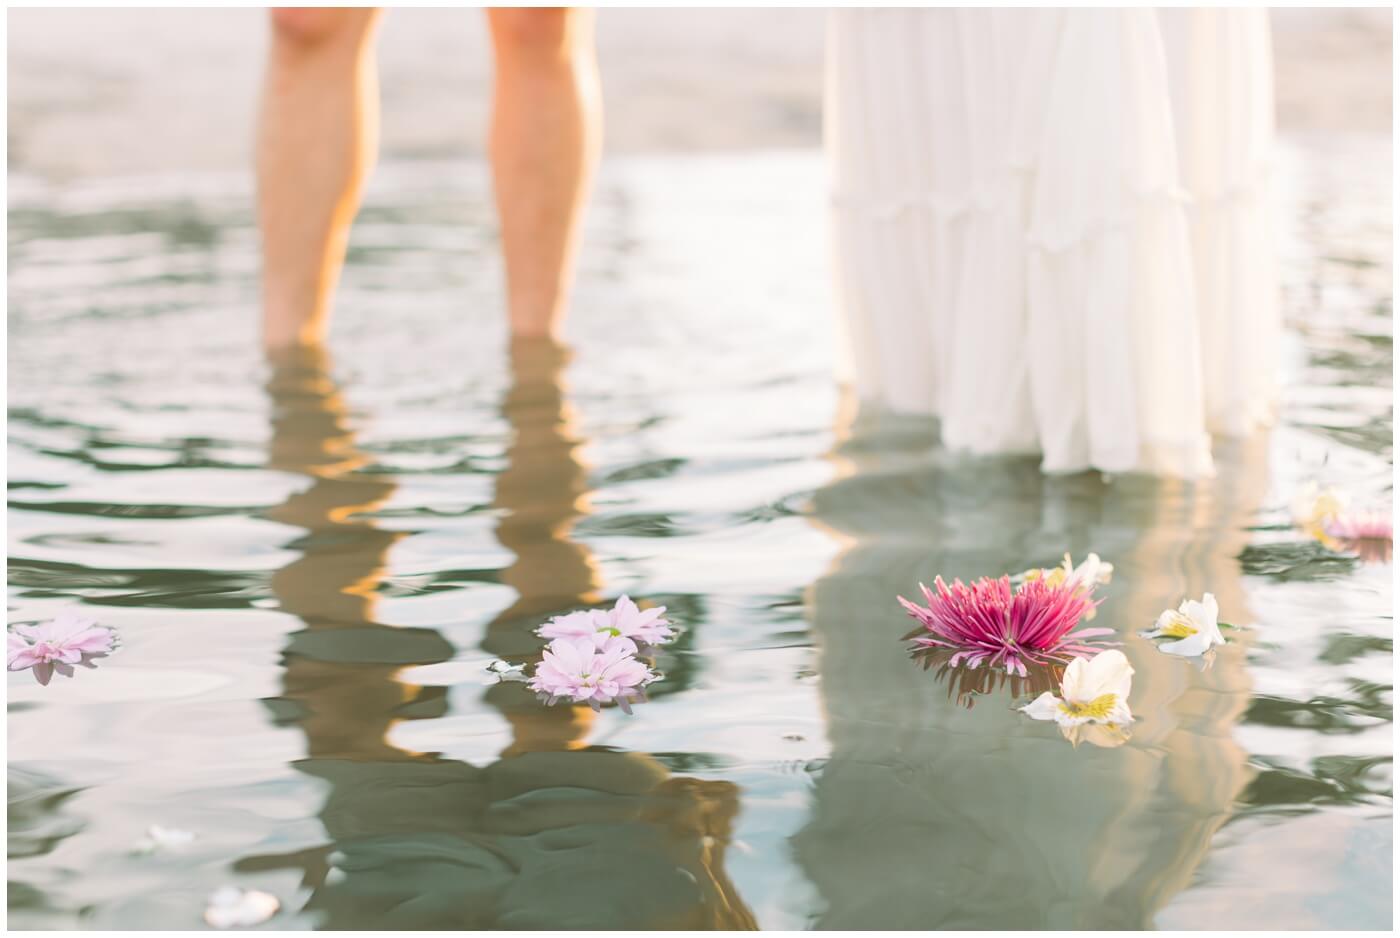 Flowers float in the water on the beach in Miami